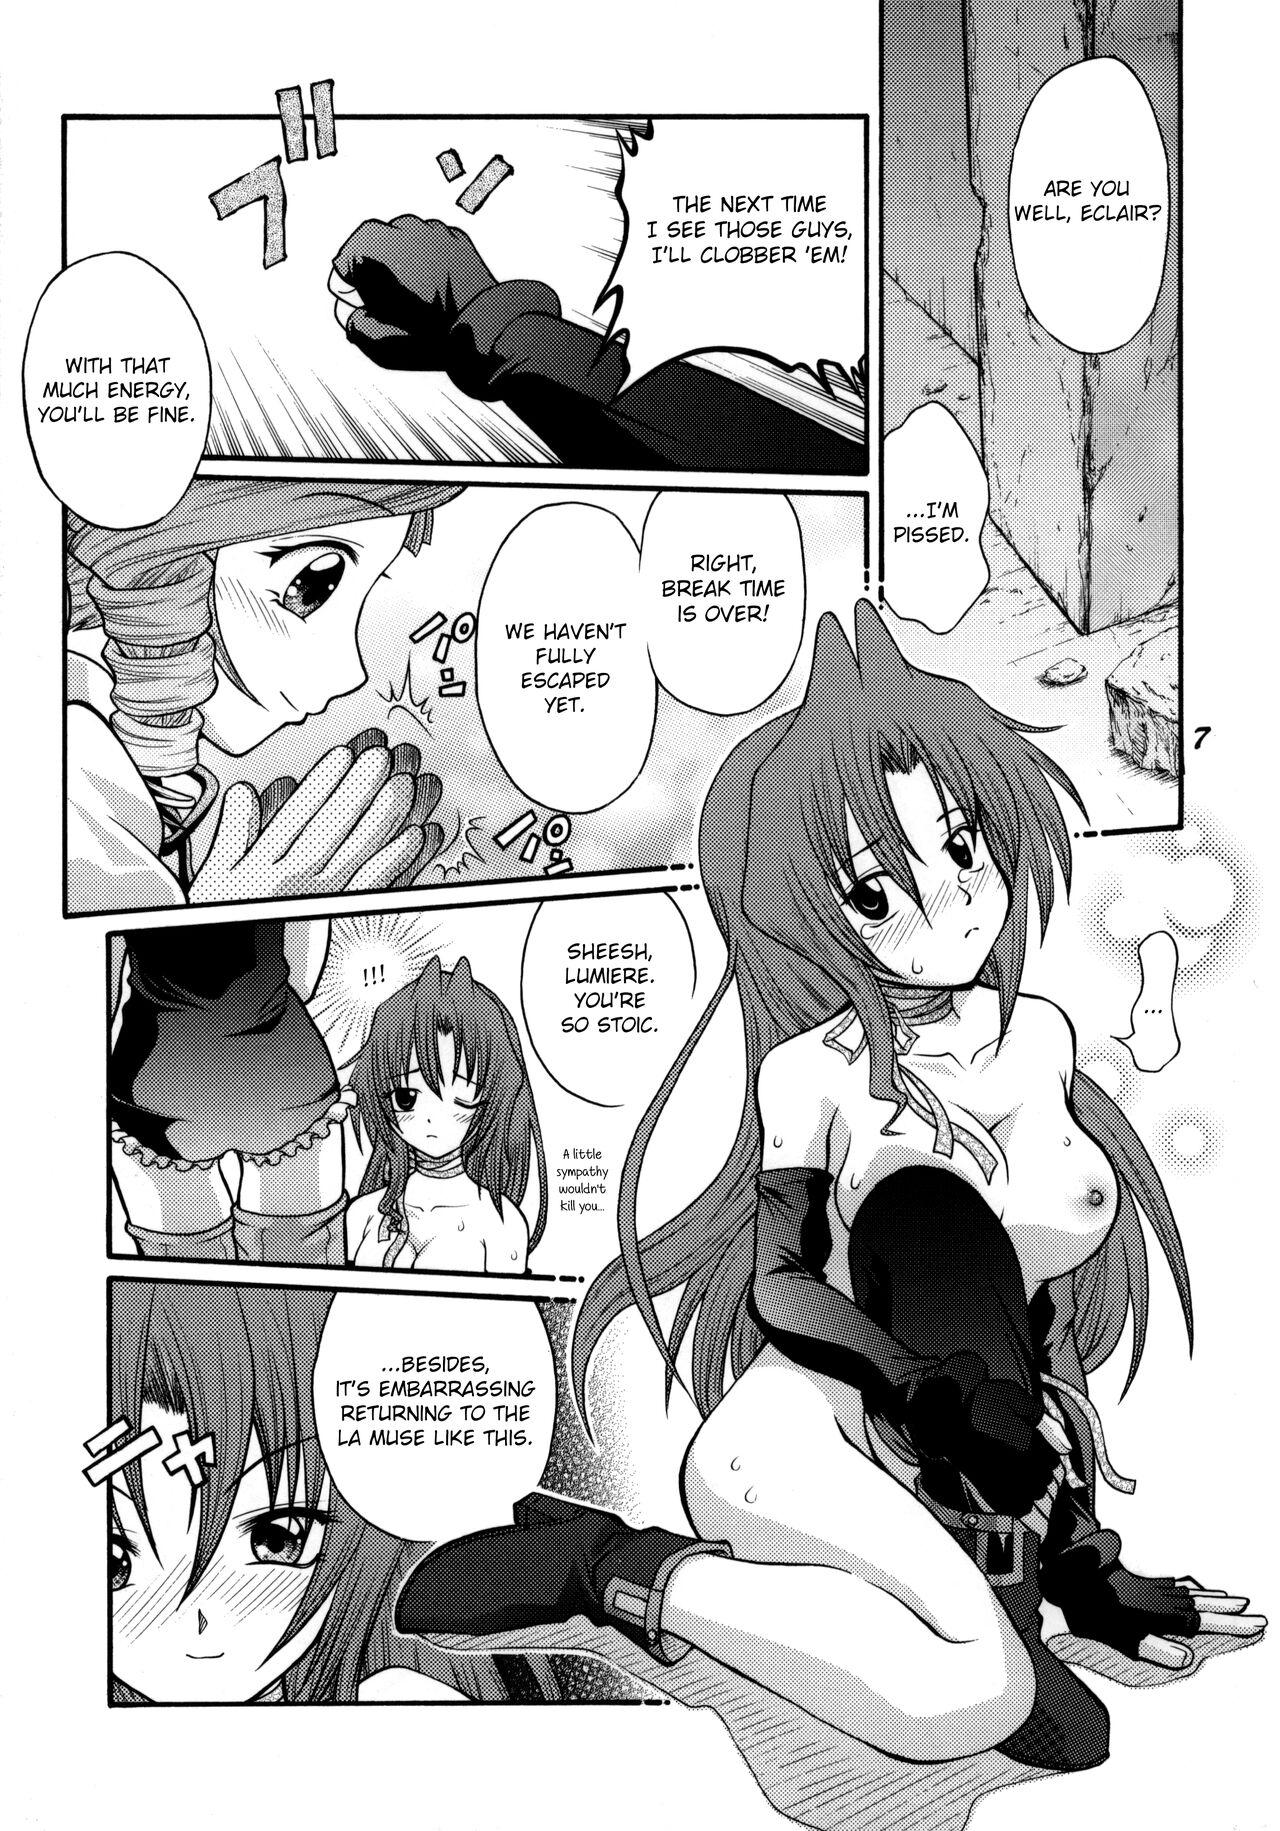 Femdom Anna Toko mo Konna Toko mo Elegant♪ | Both Places Like That and Places Like This Are Elegant♪ - Kiddy grade Wanking - Page 6